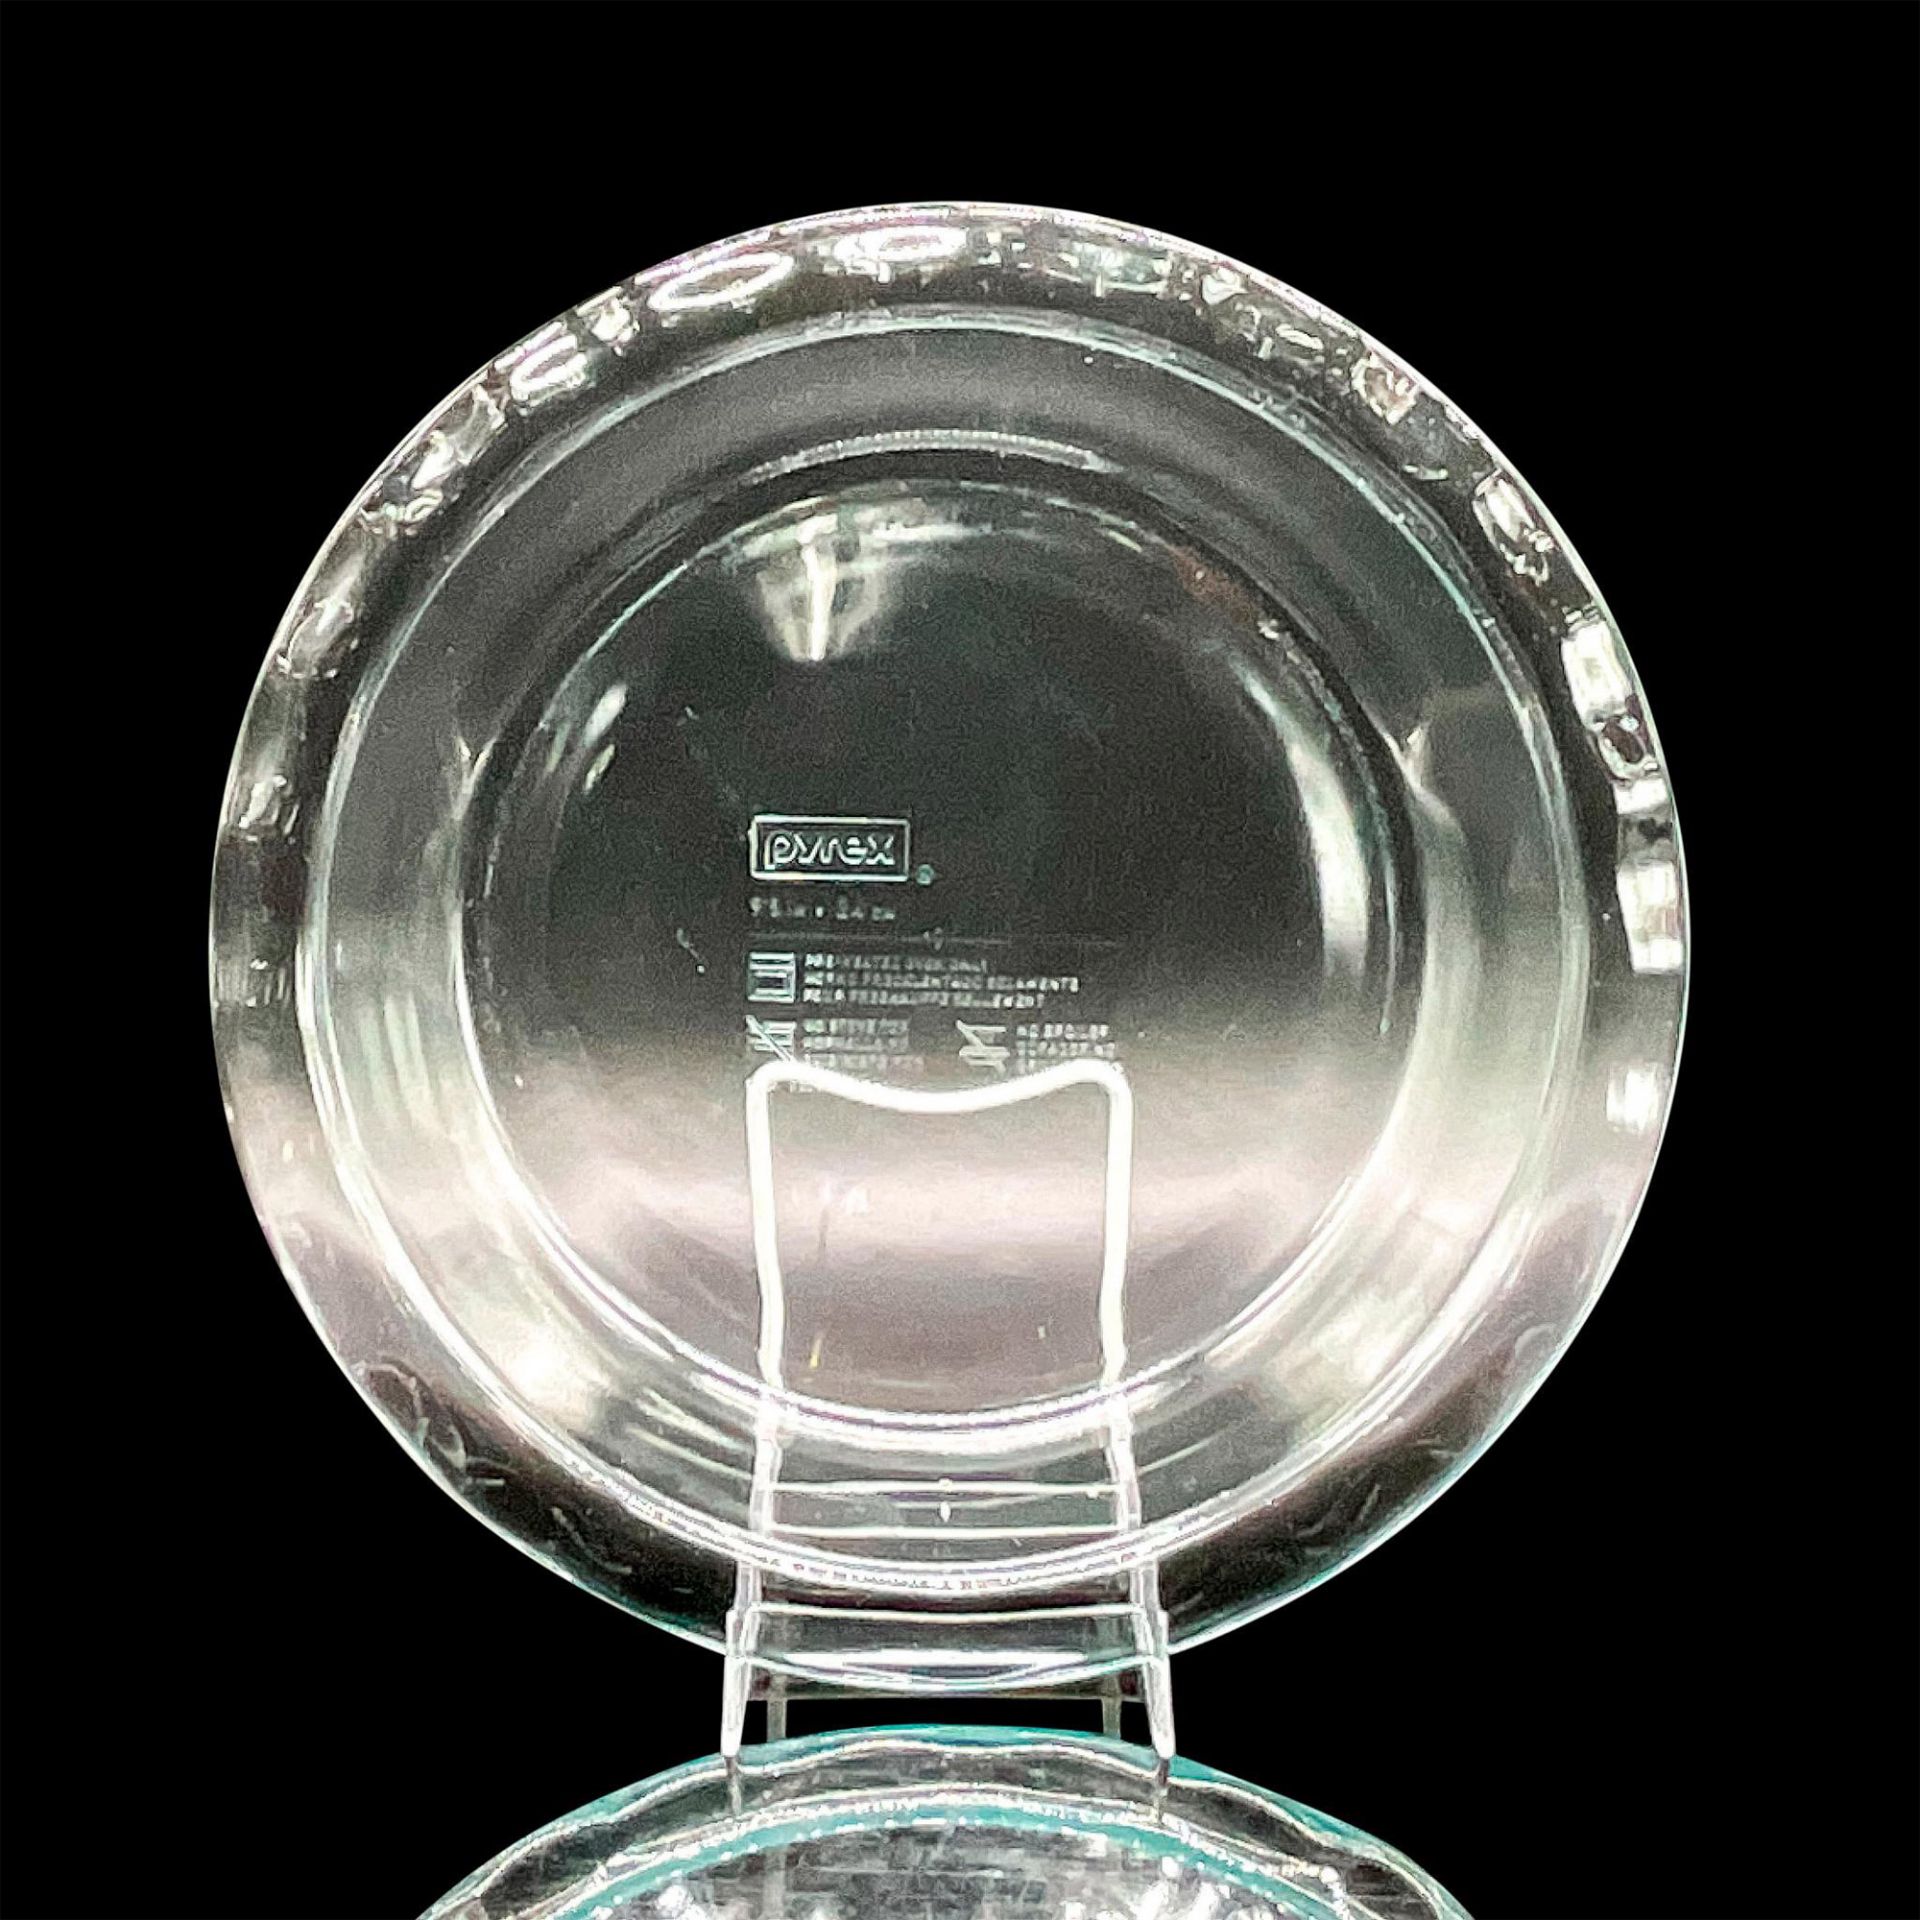 3pc Pyrex Glass Bakeware Glass Dishes - Image 4 of 4